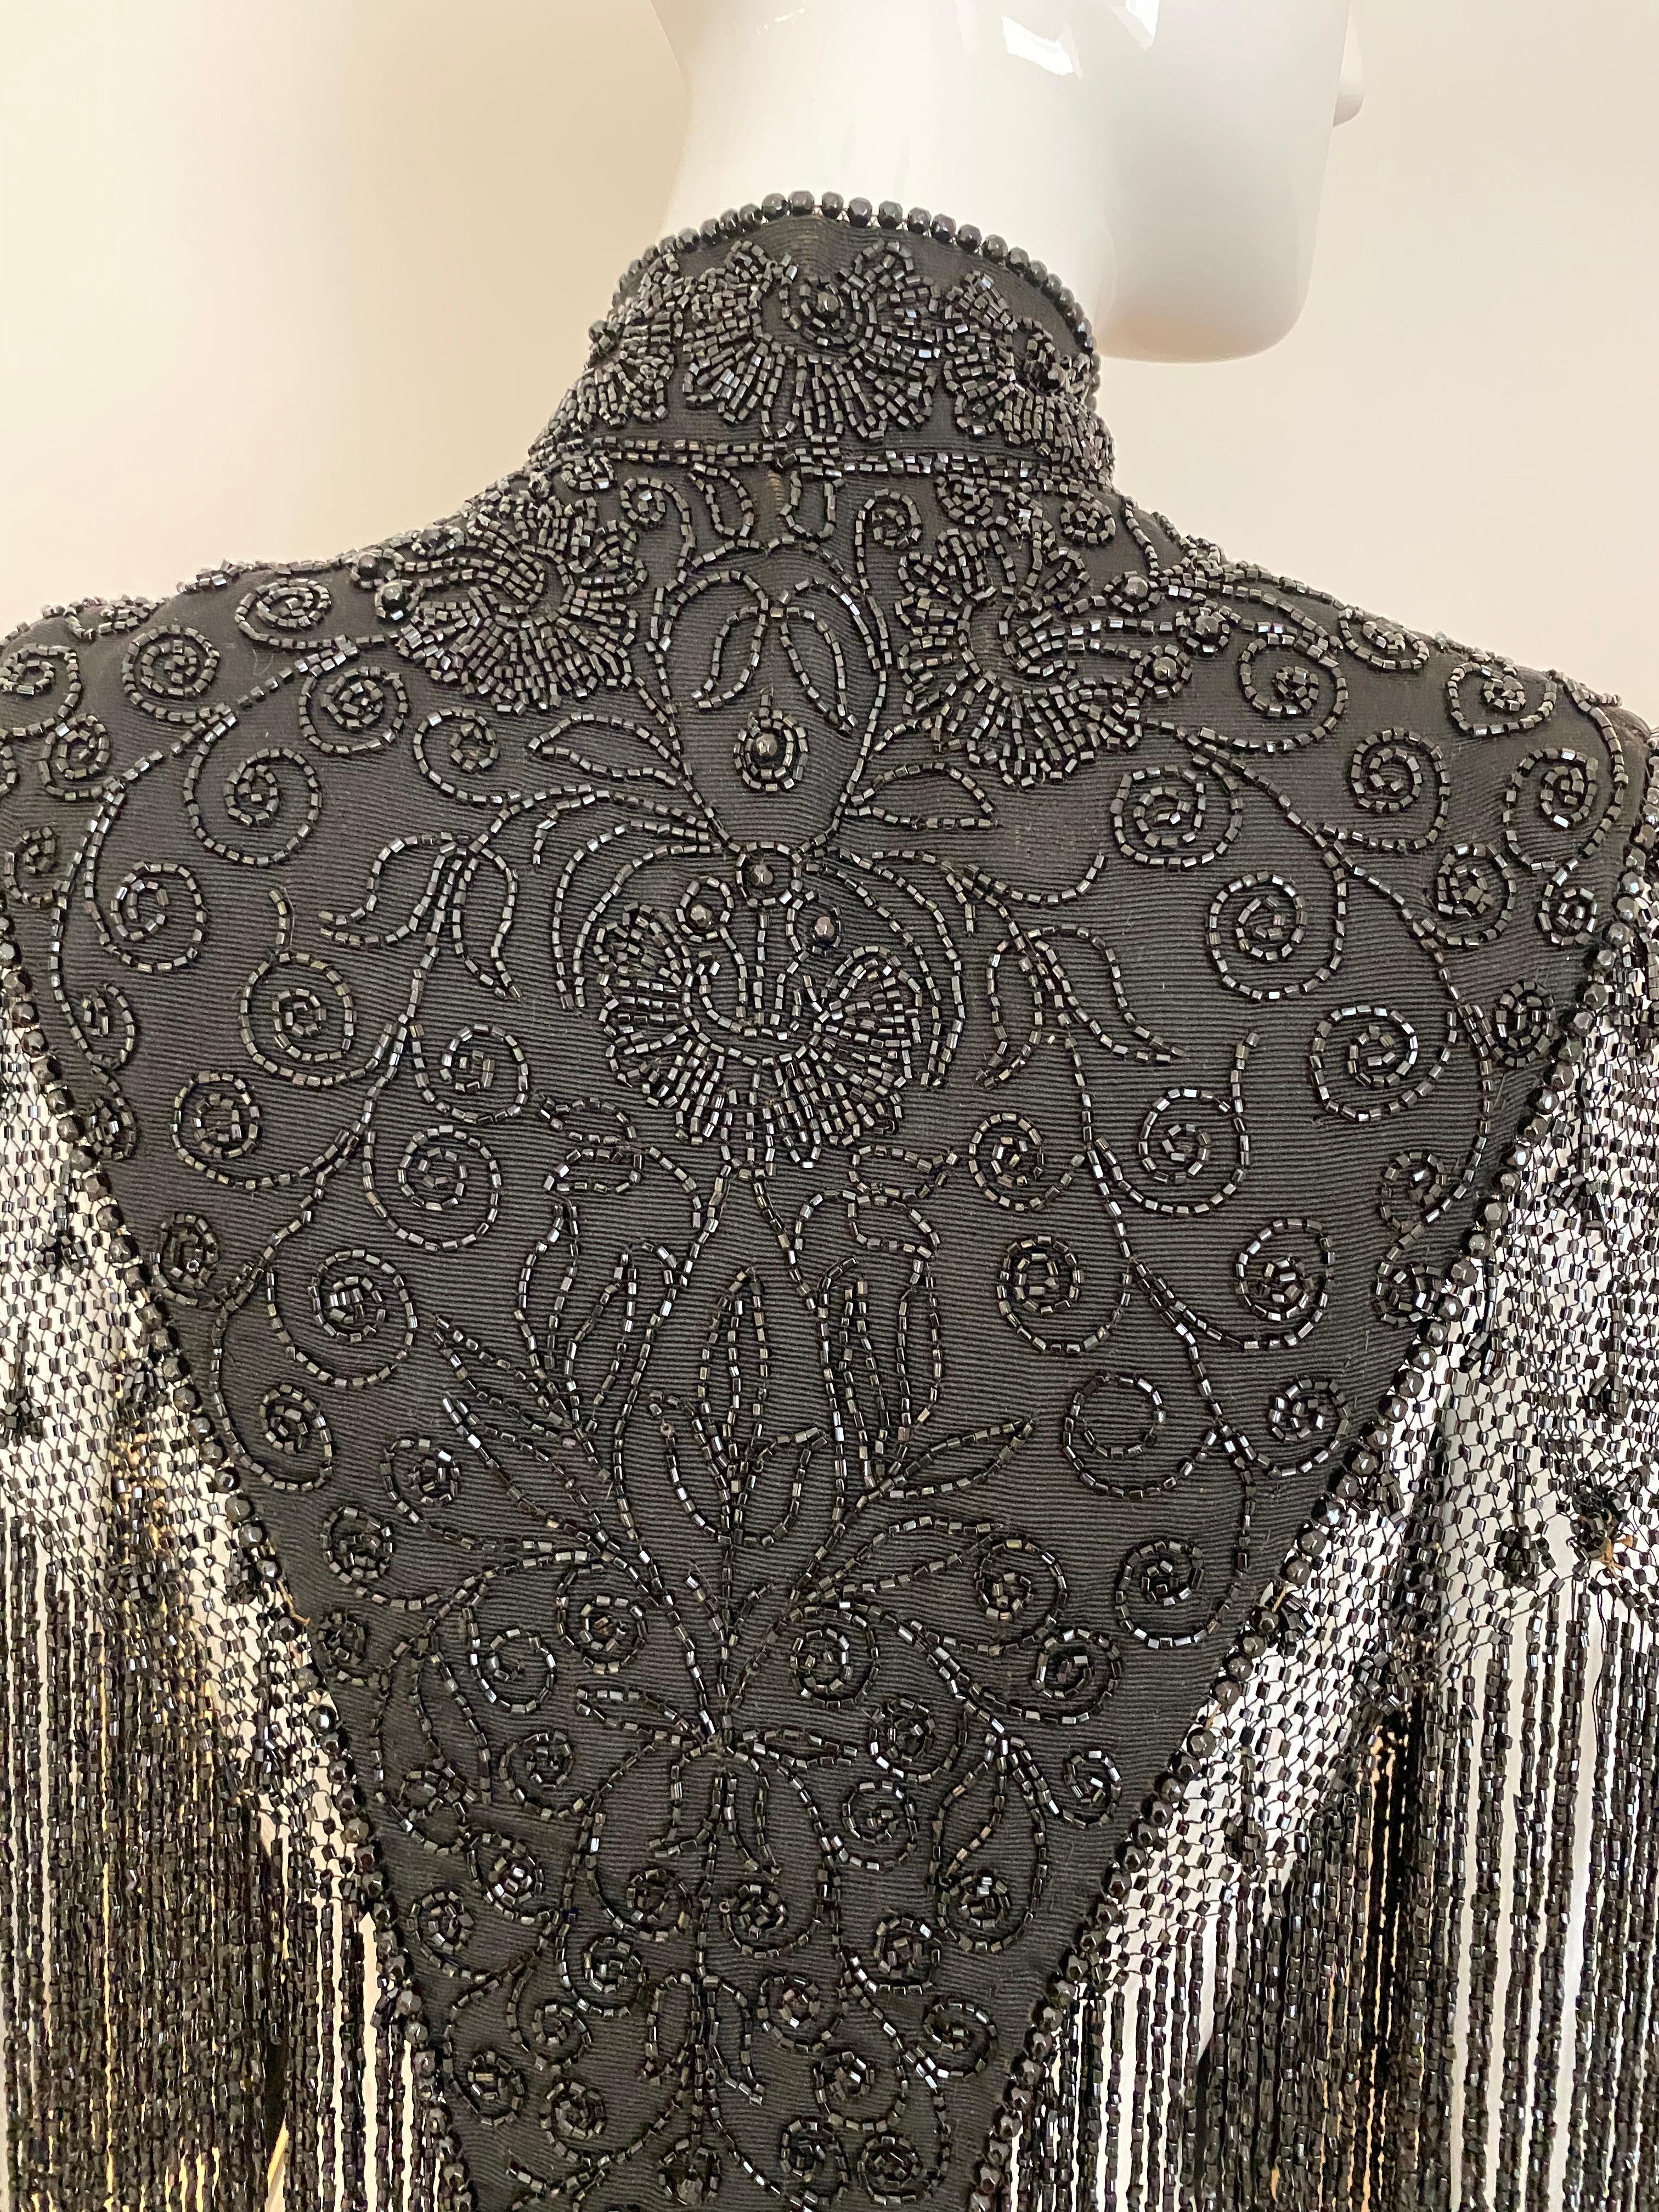 1880s Victorian Black Beaded Mantel Vest top with bead tassel.
Fit size 0/2/4/ XS/ Small
